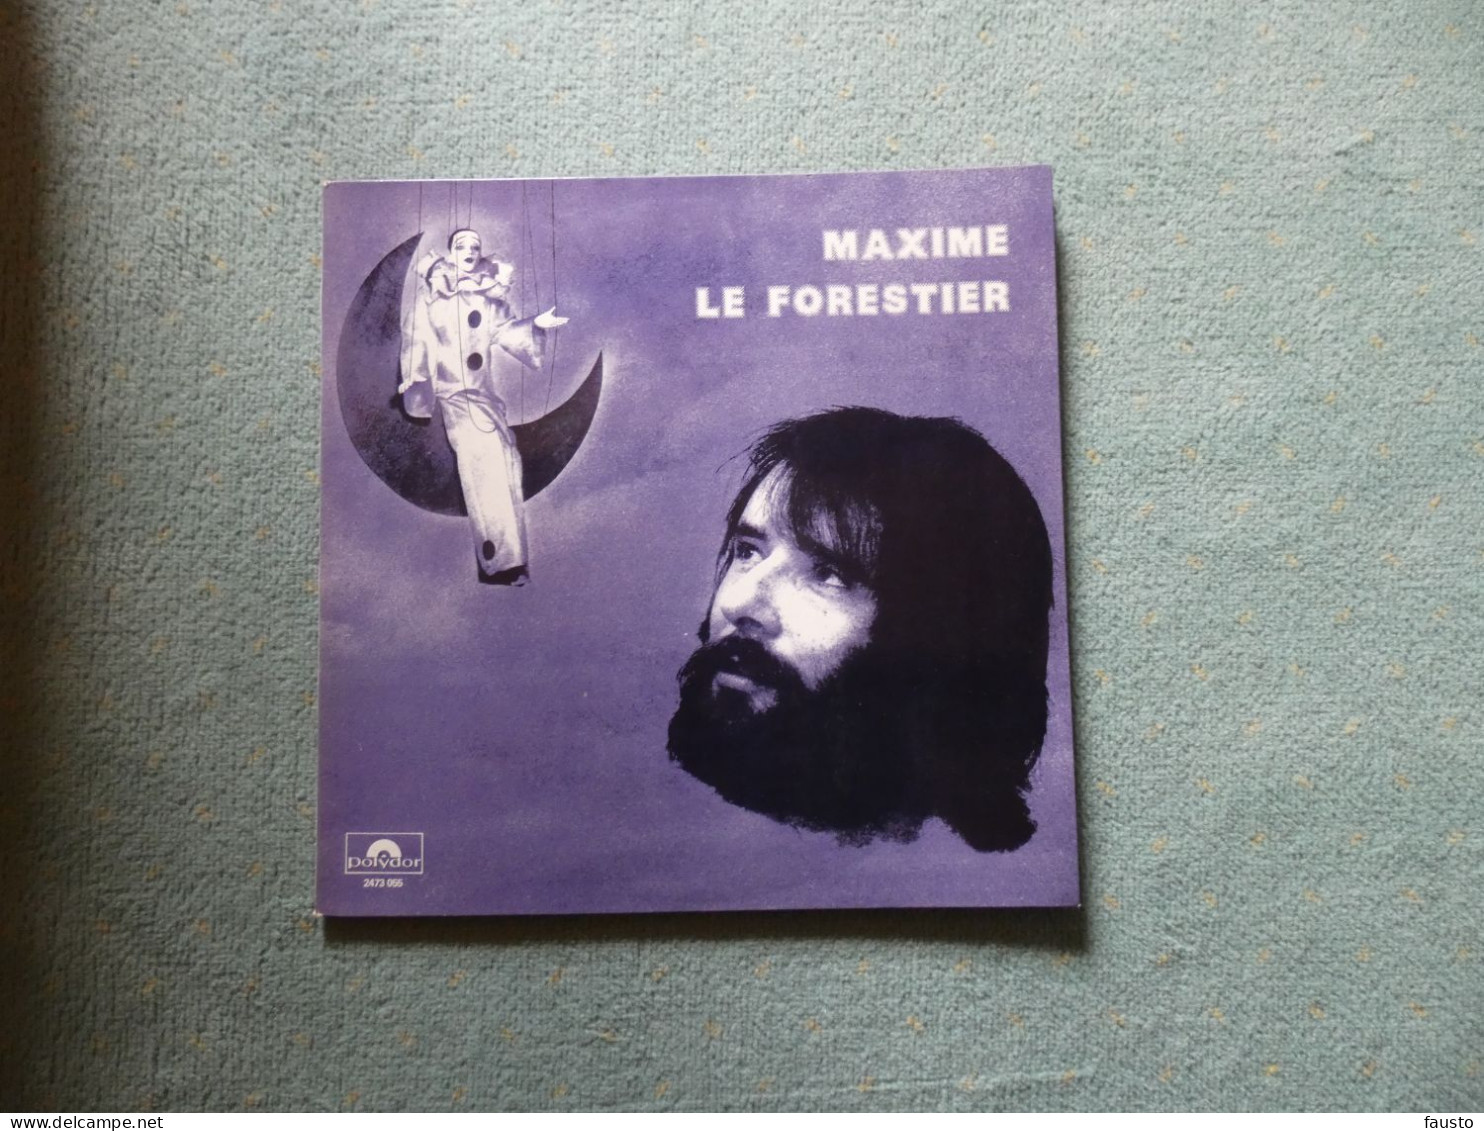 Maxime Le Forestier Polydor 2473 055   1976 - Other - French Music